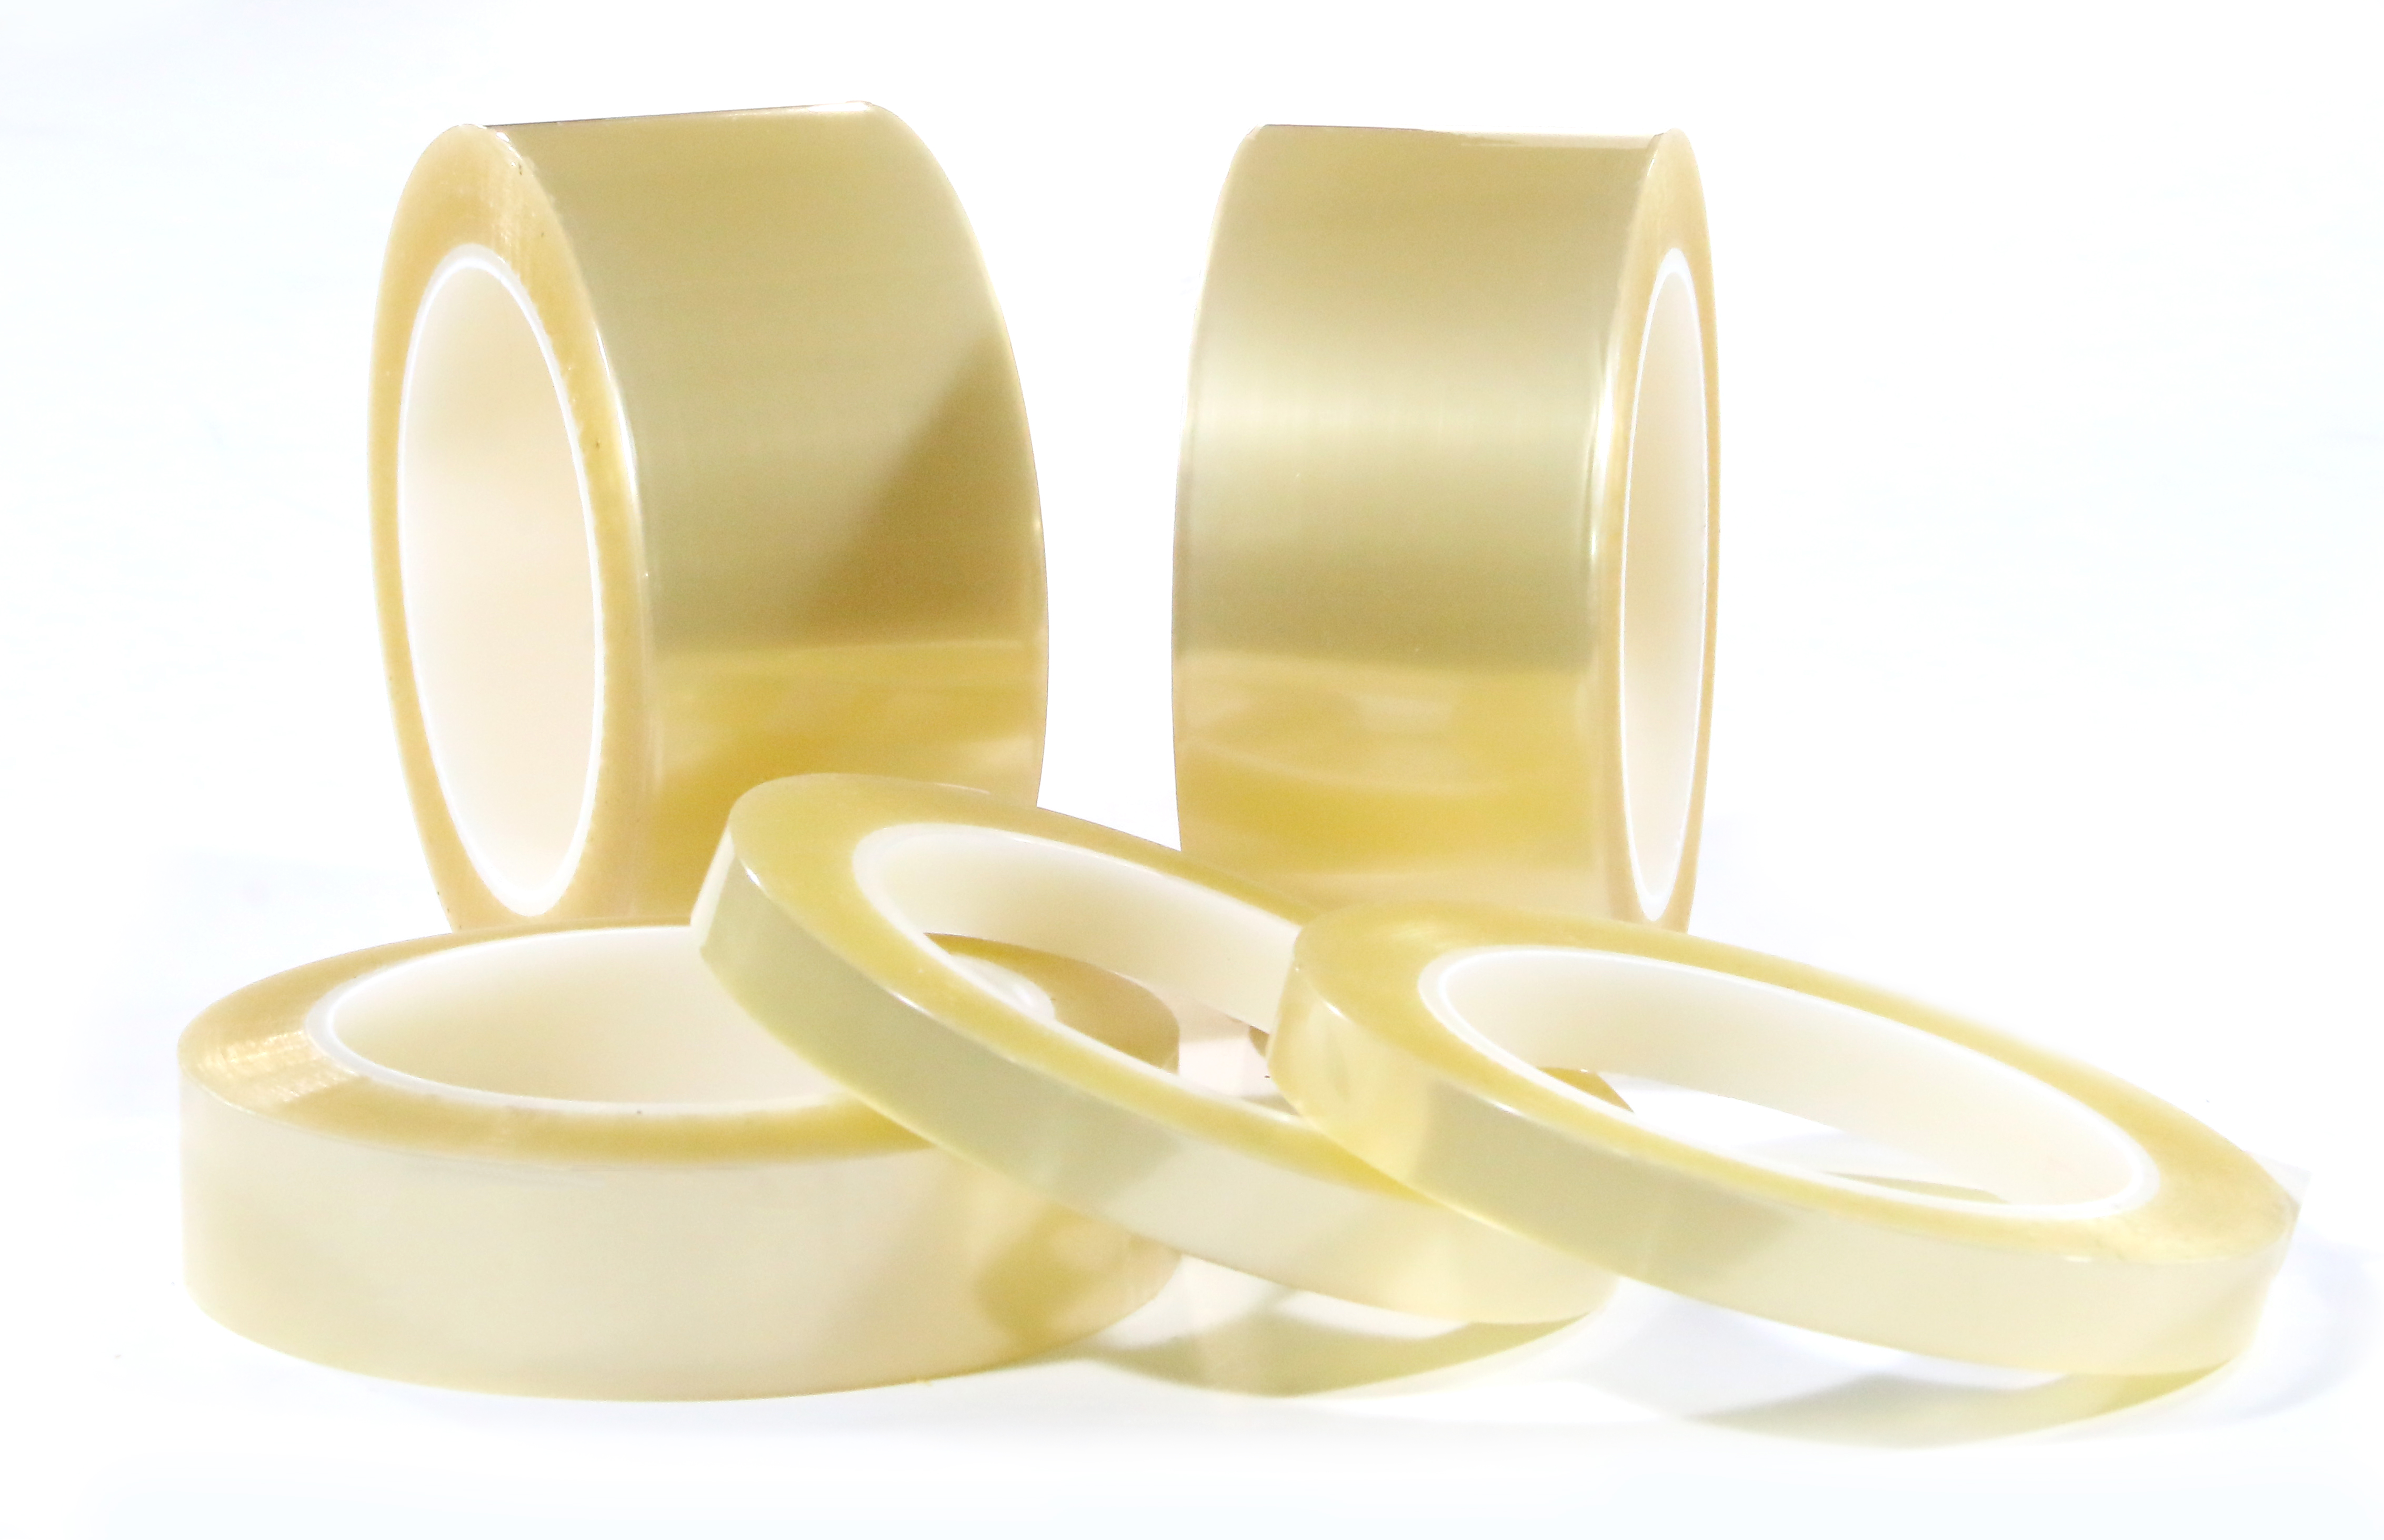 Amber 1/2 Width Maxi Adhesive Products Inc. 1/2 Width Maxi 828K Kapton Premium Grade Polyamide Film Tape with 1.5 mil Silicone Adhesive 2.5 mil Thick 36 yds Length 